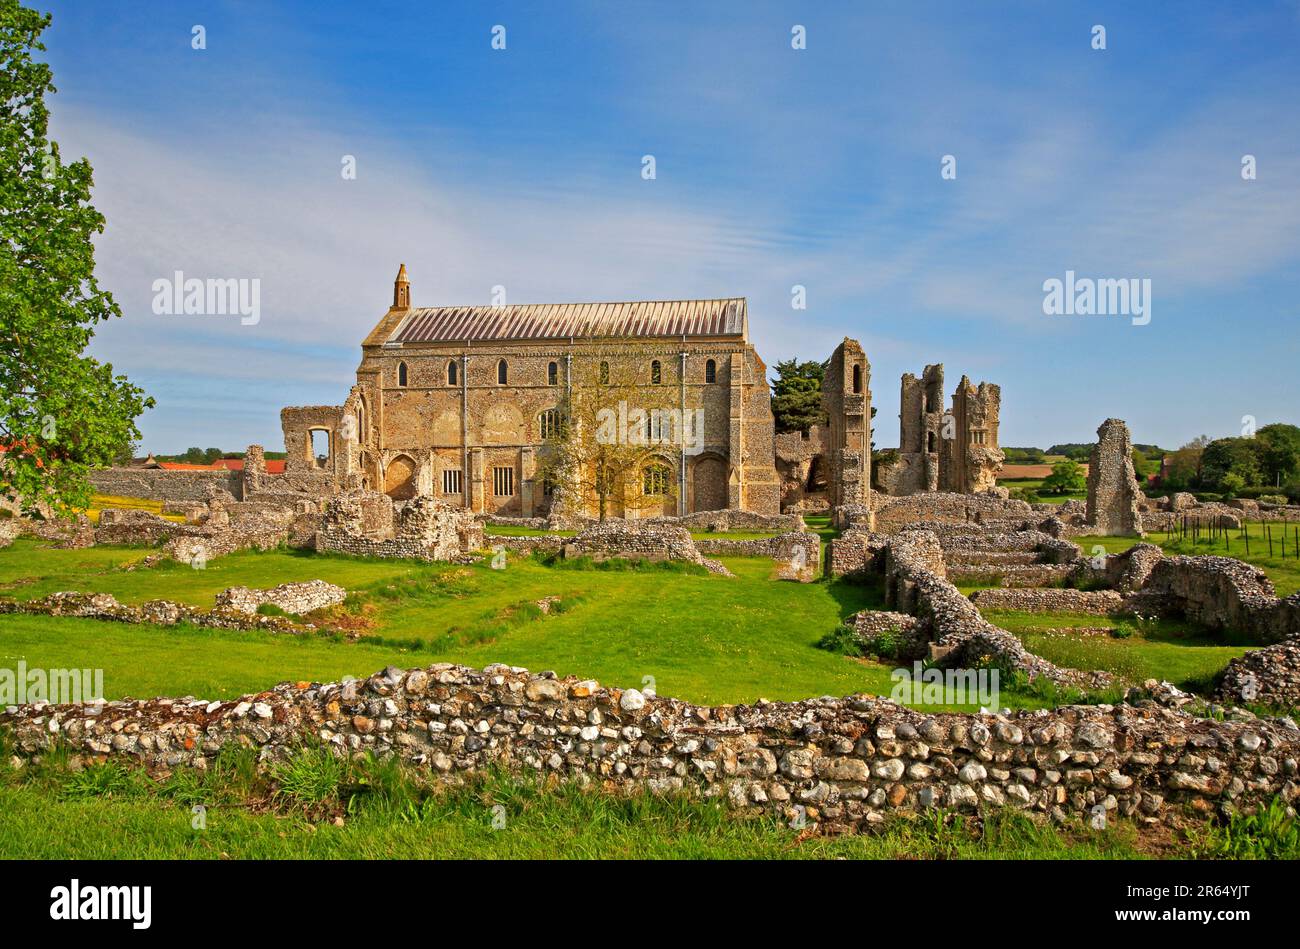 A view from the south of the ruins of Binham Priory with the parish Church of St Mary and the Holy Cross at Binham, Norfolk, England, United Kingdom. Stock Photo